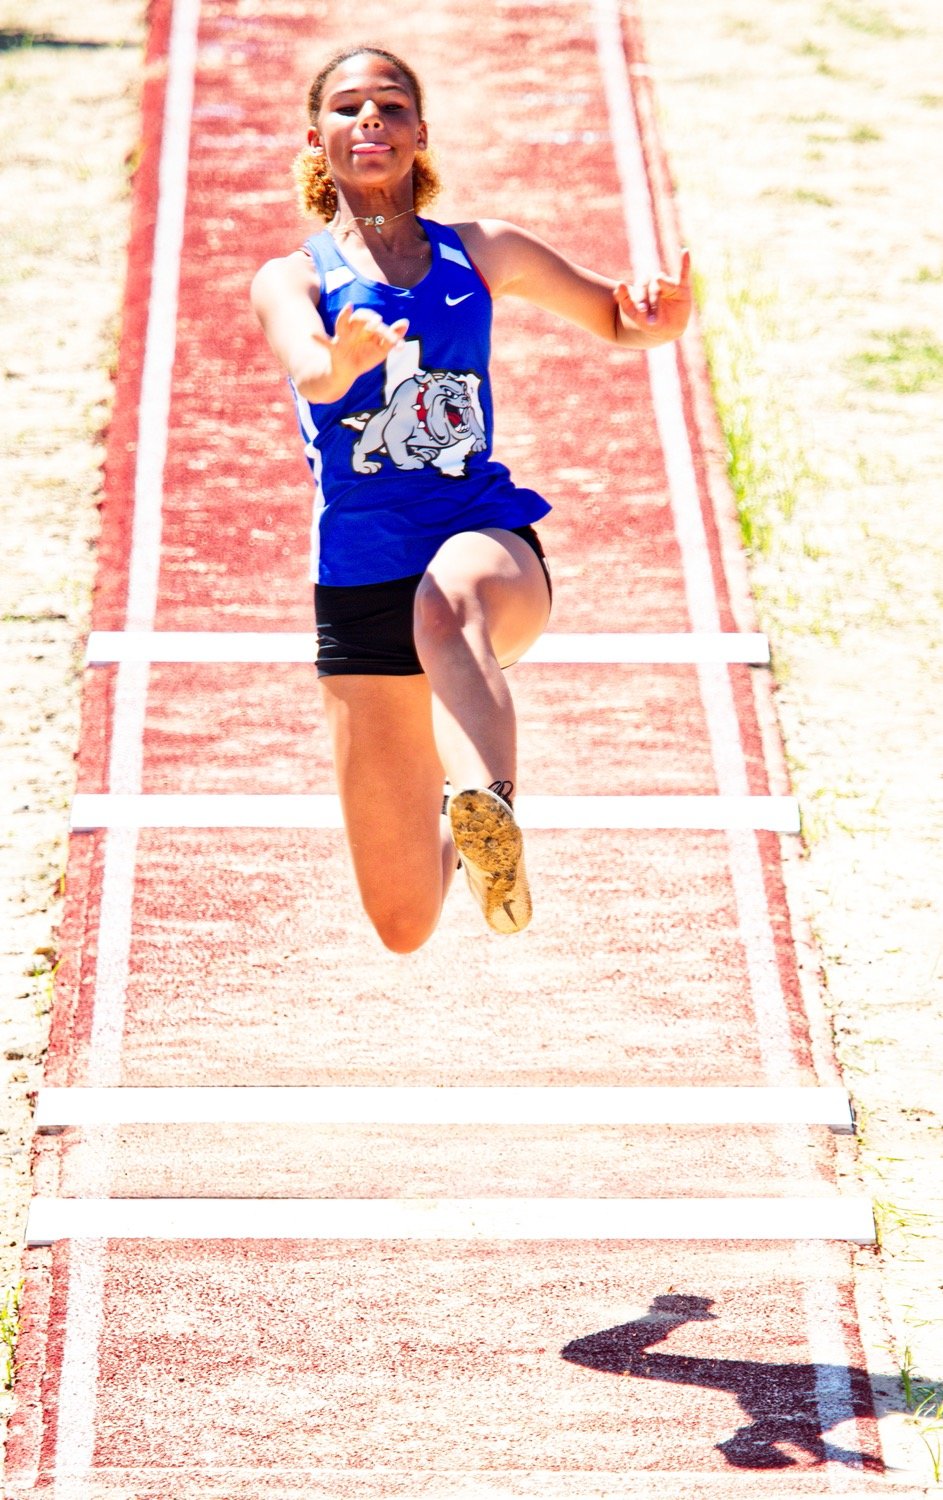 Isis Murlin jumped 15'-7.25" to place 6th for Quitman in the long jump. [admire more awesome athletics]